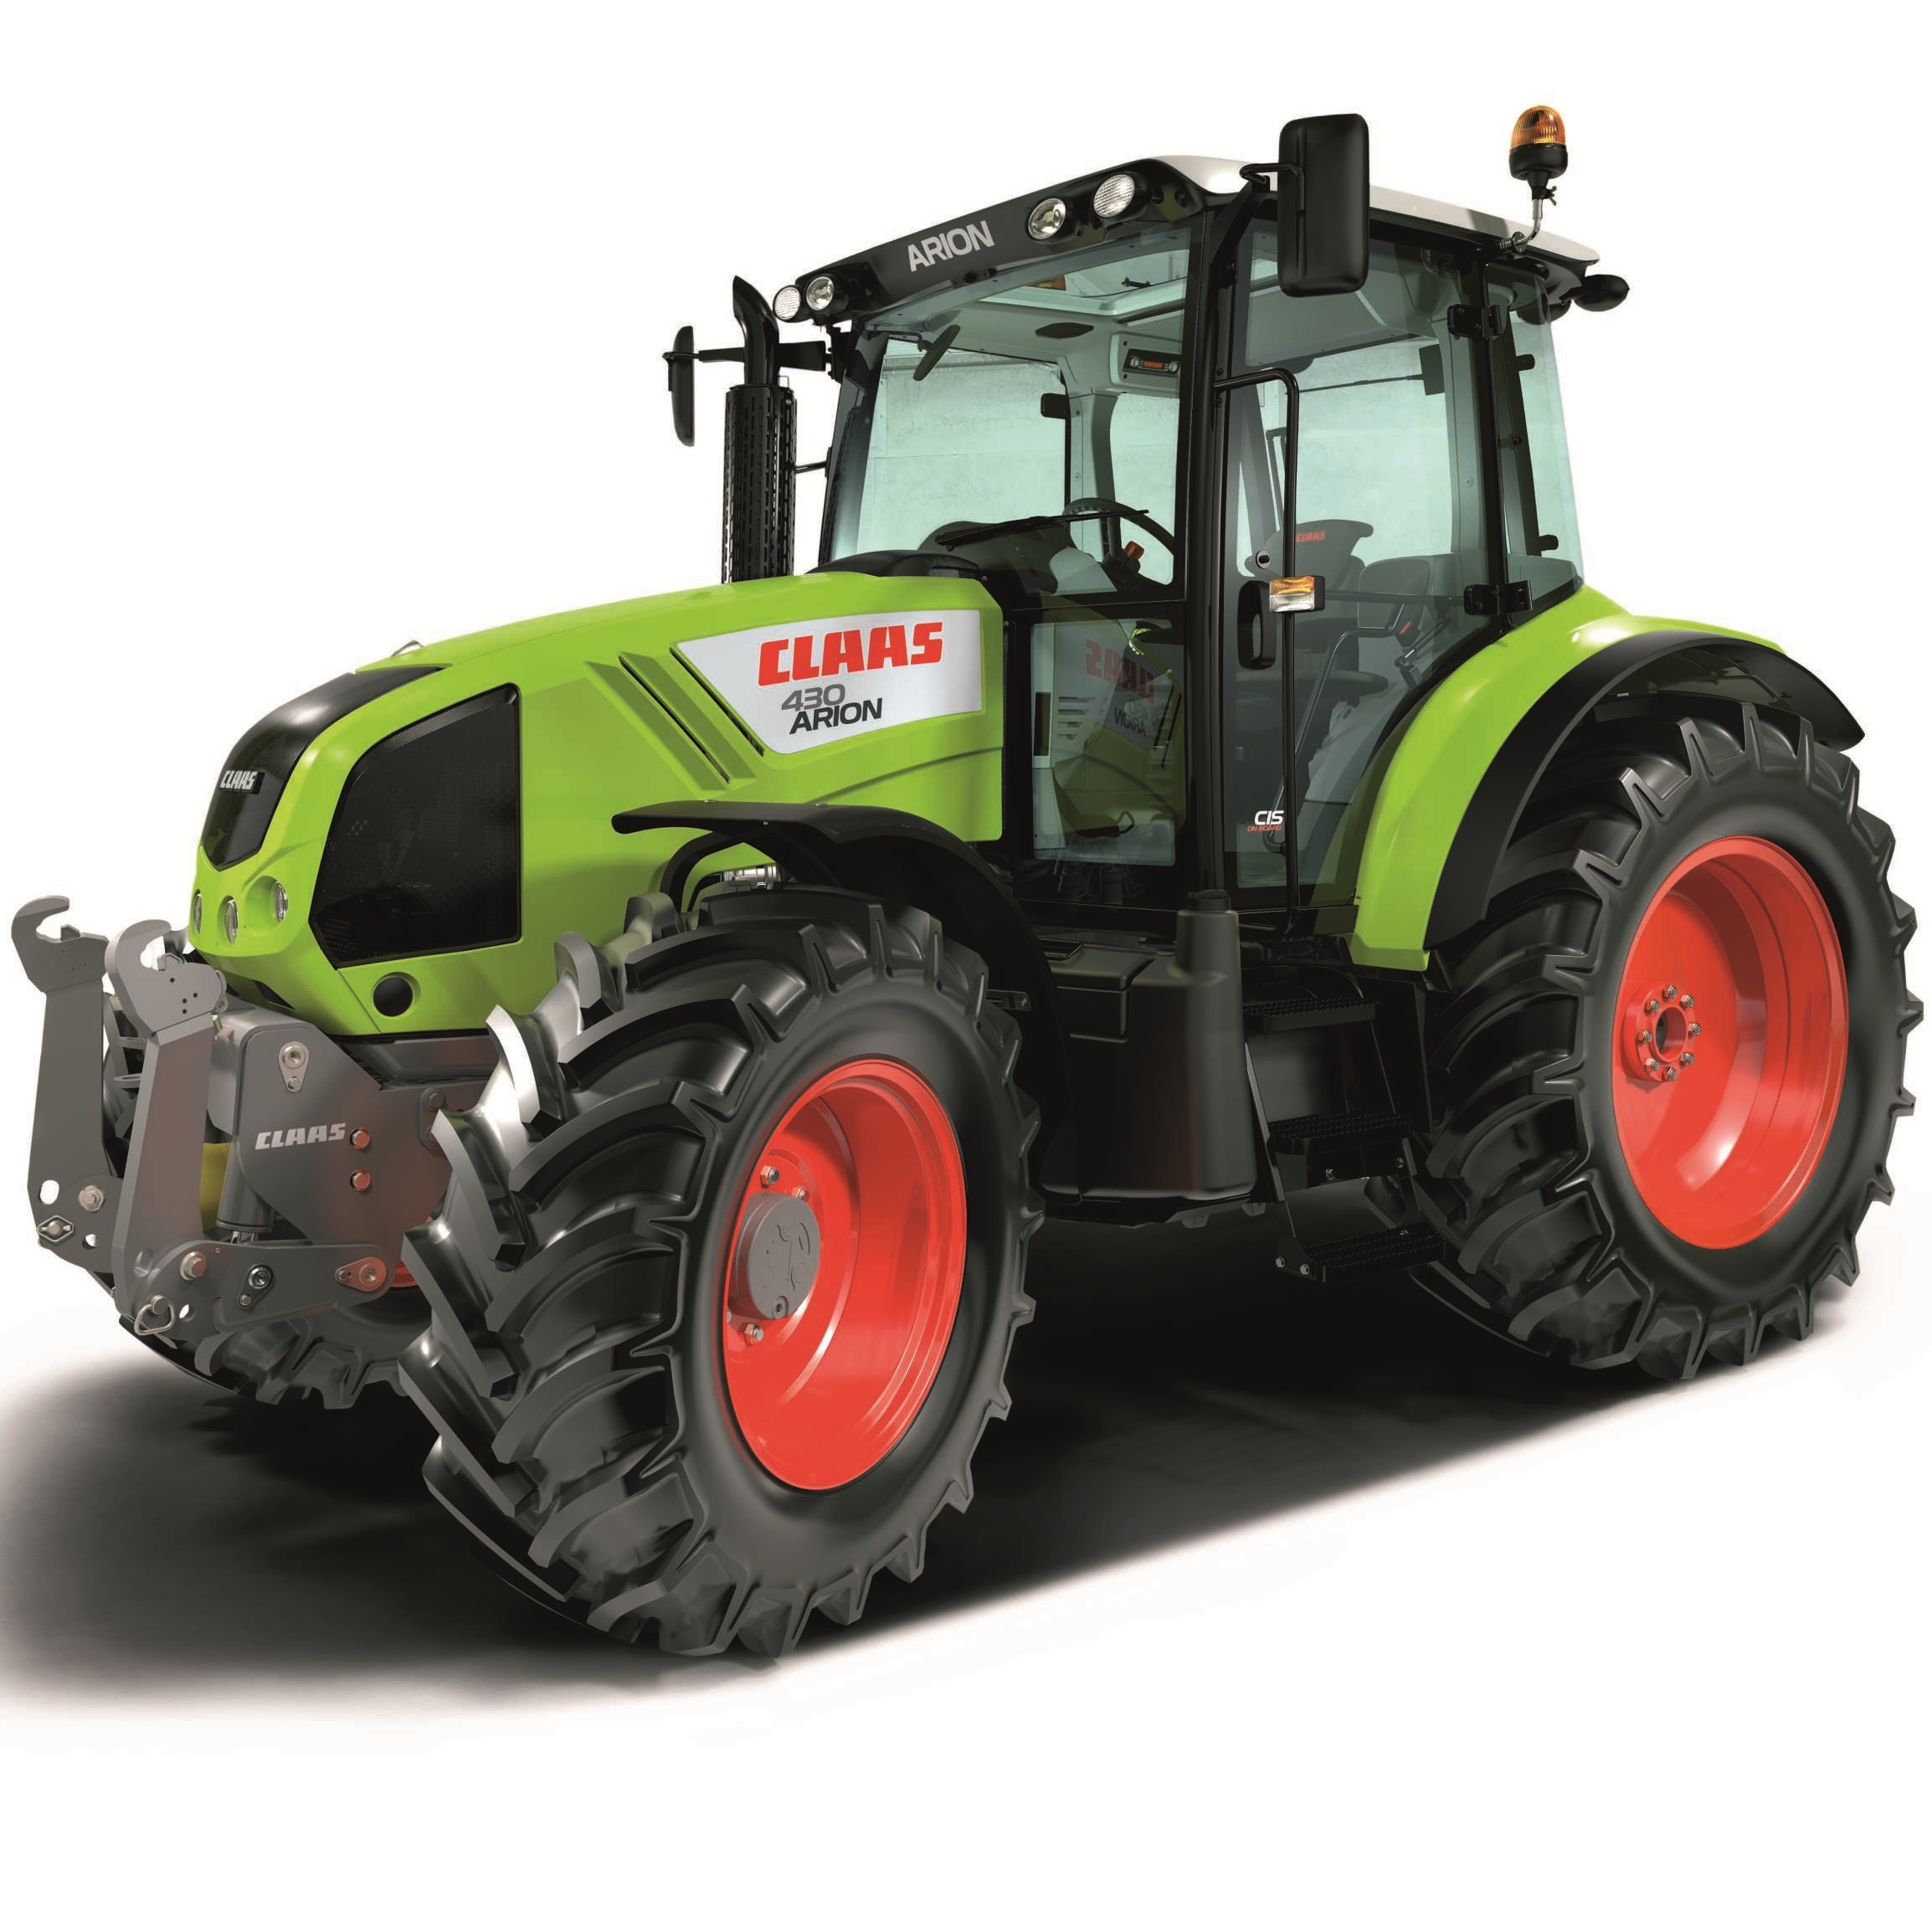 Fichiers Tuning Haute Qualité Claas Tractor Arion 410 CIS 4-4525 CR JD z CPM i-EGR 95hp